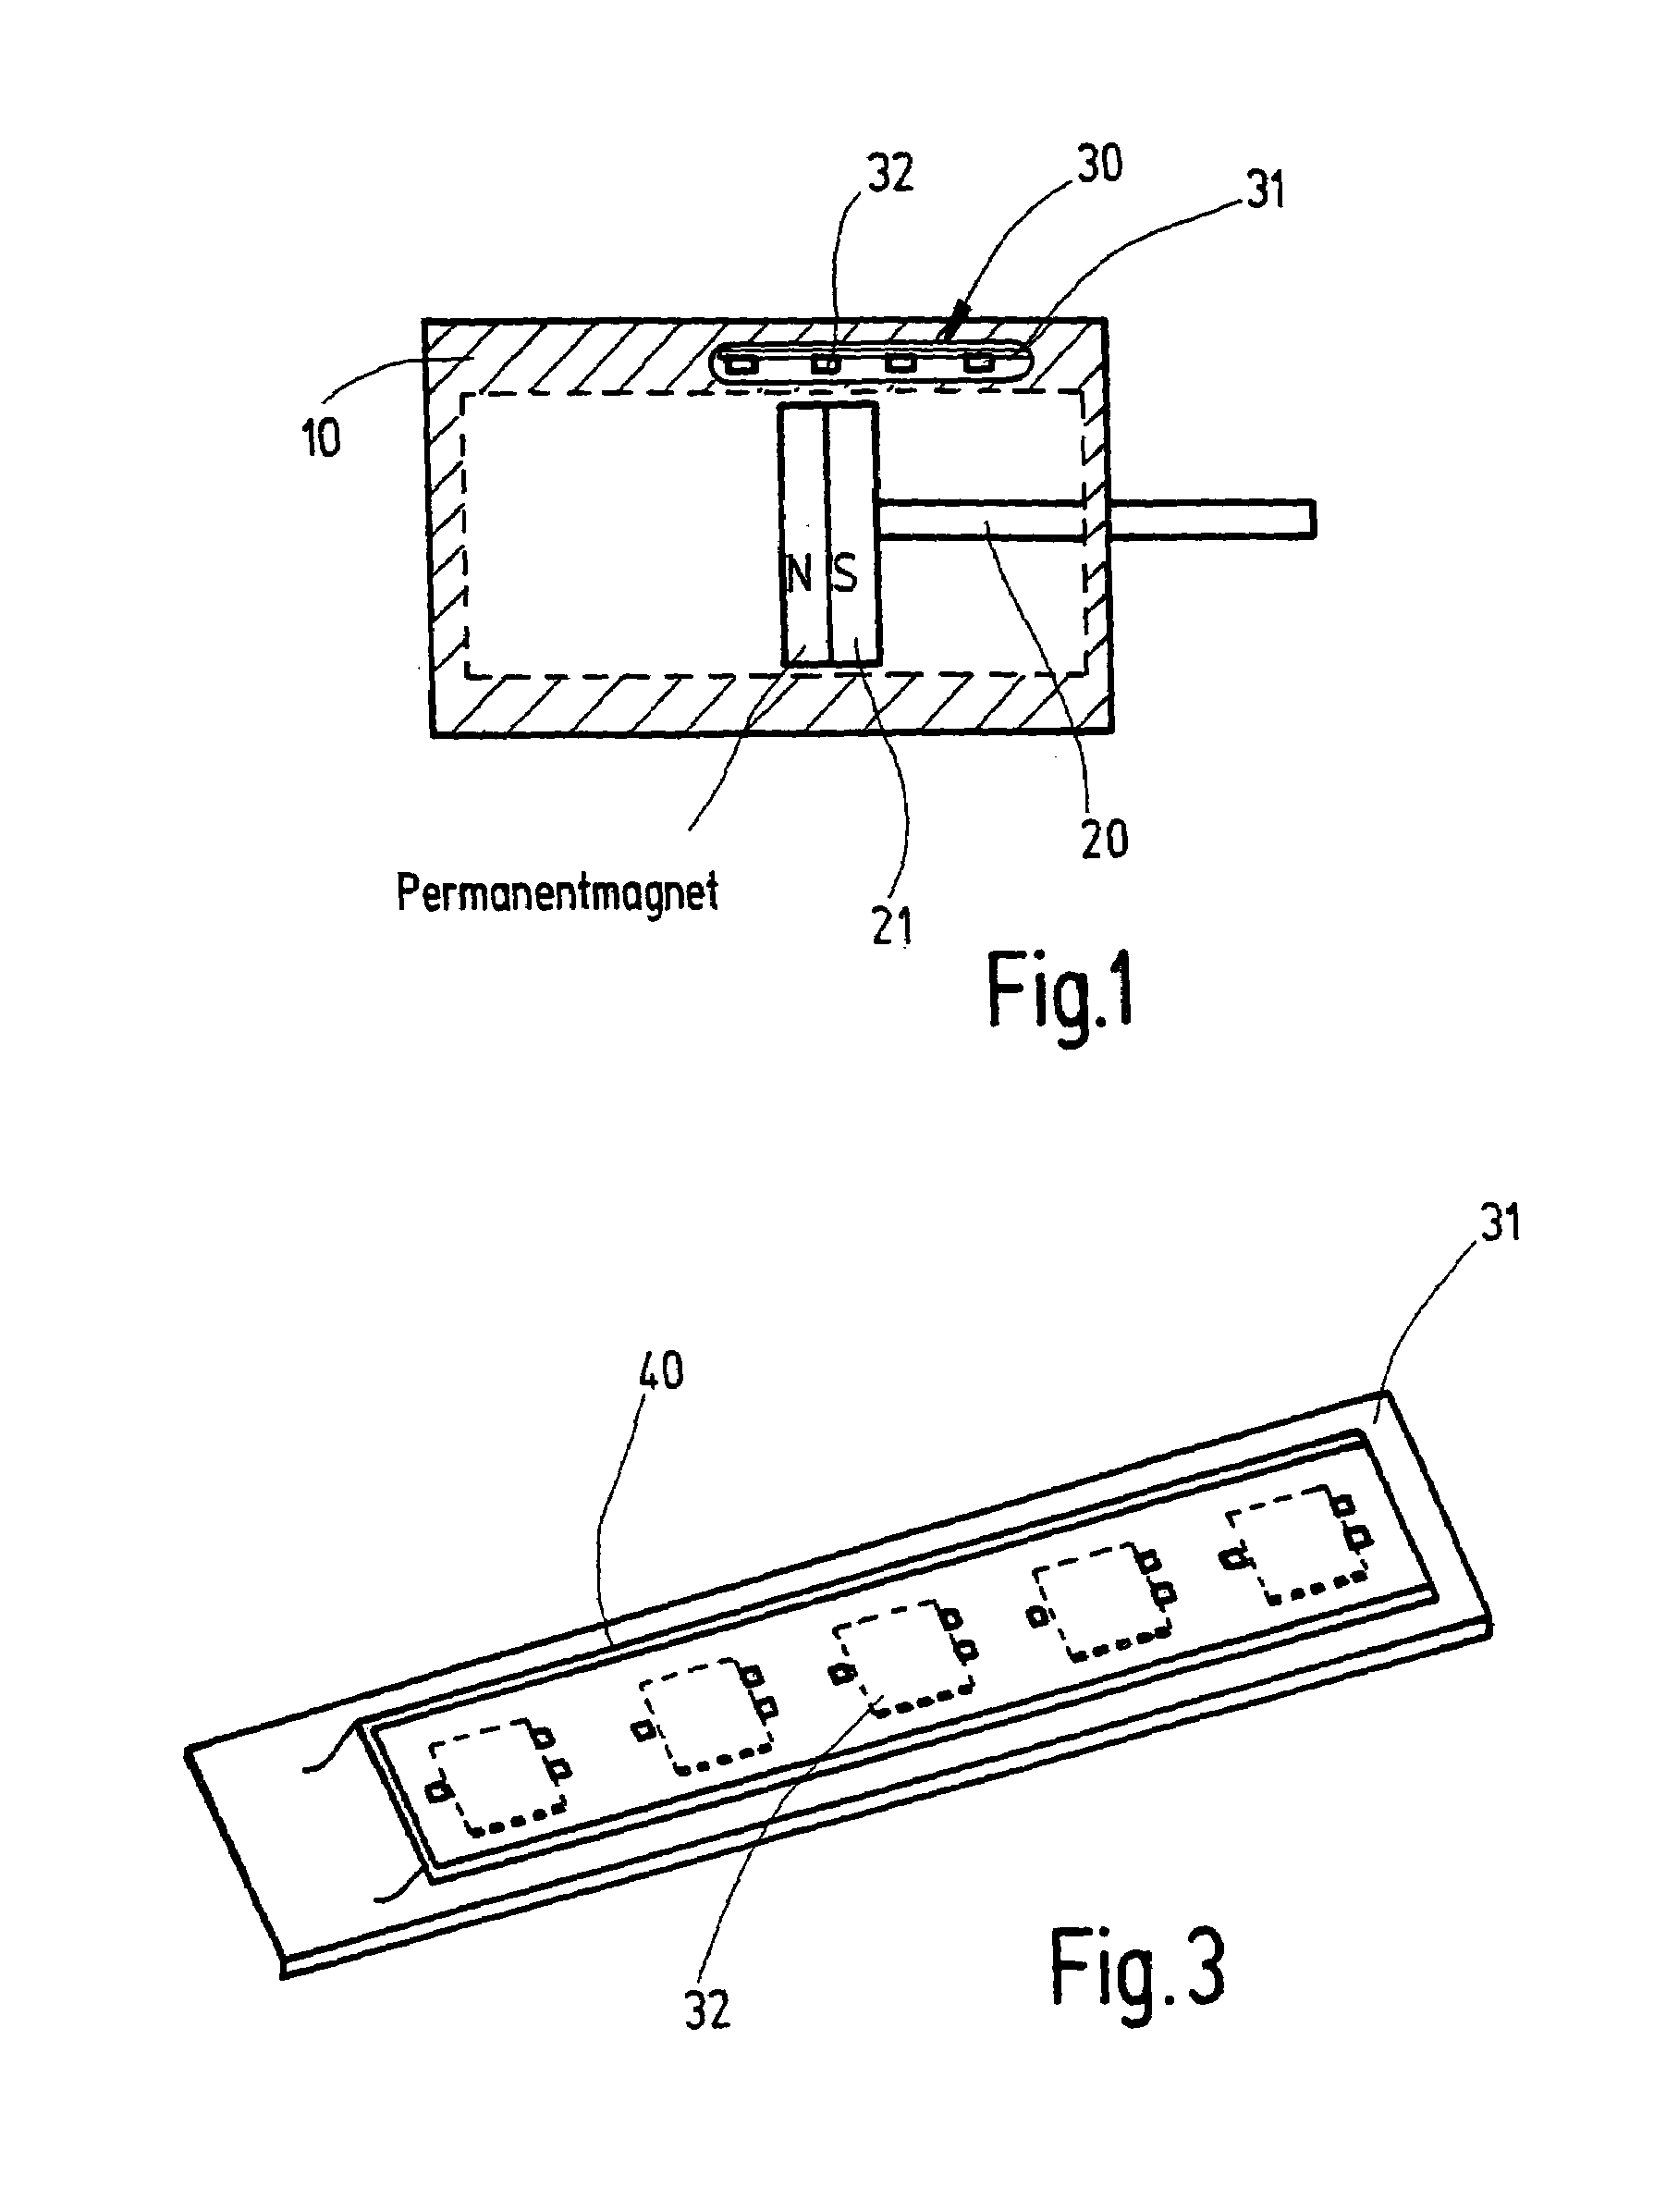 Position-measuring device for fluidic cylinder-and-piston arrangements